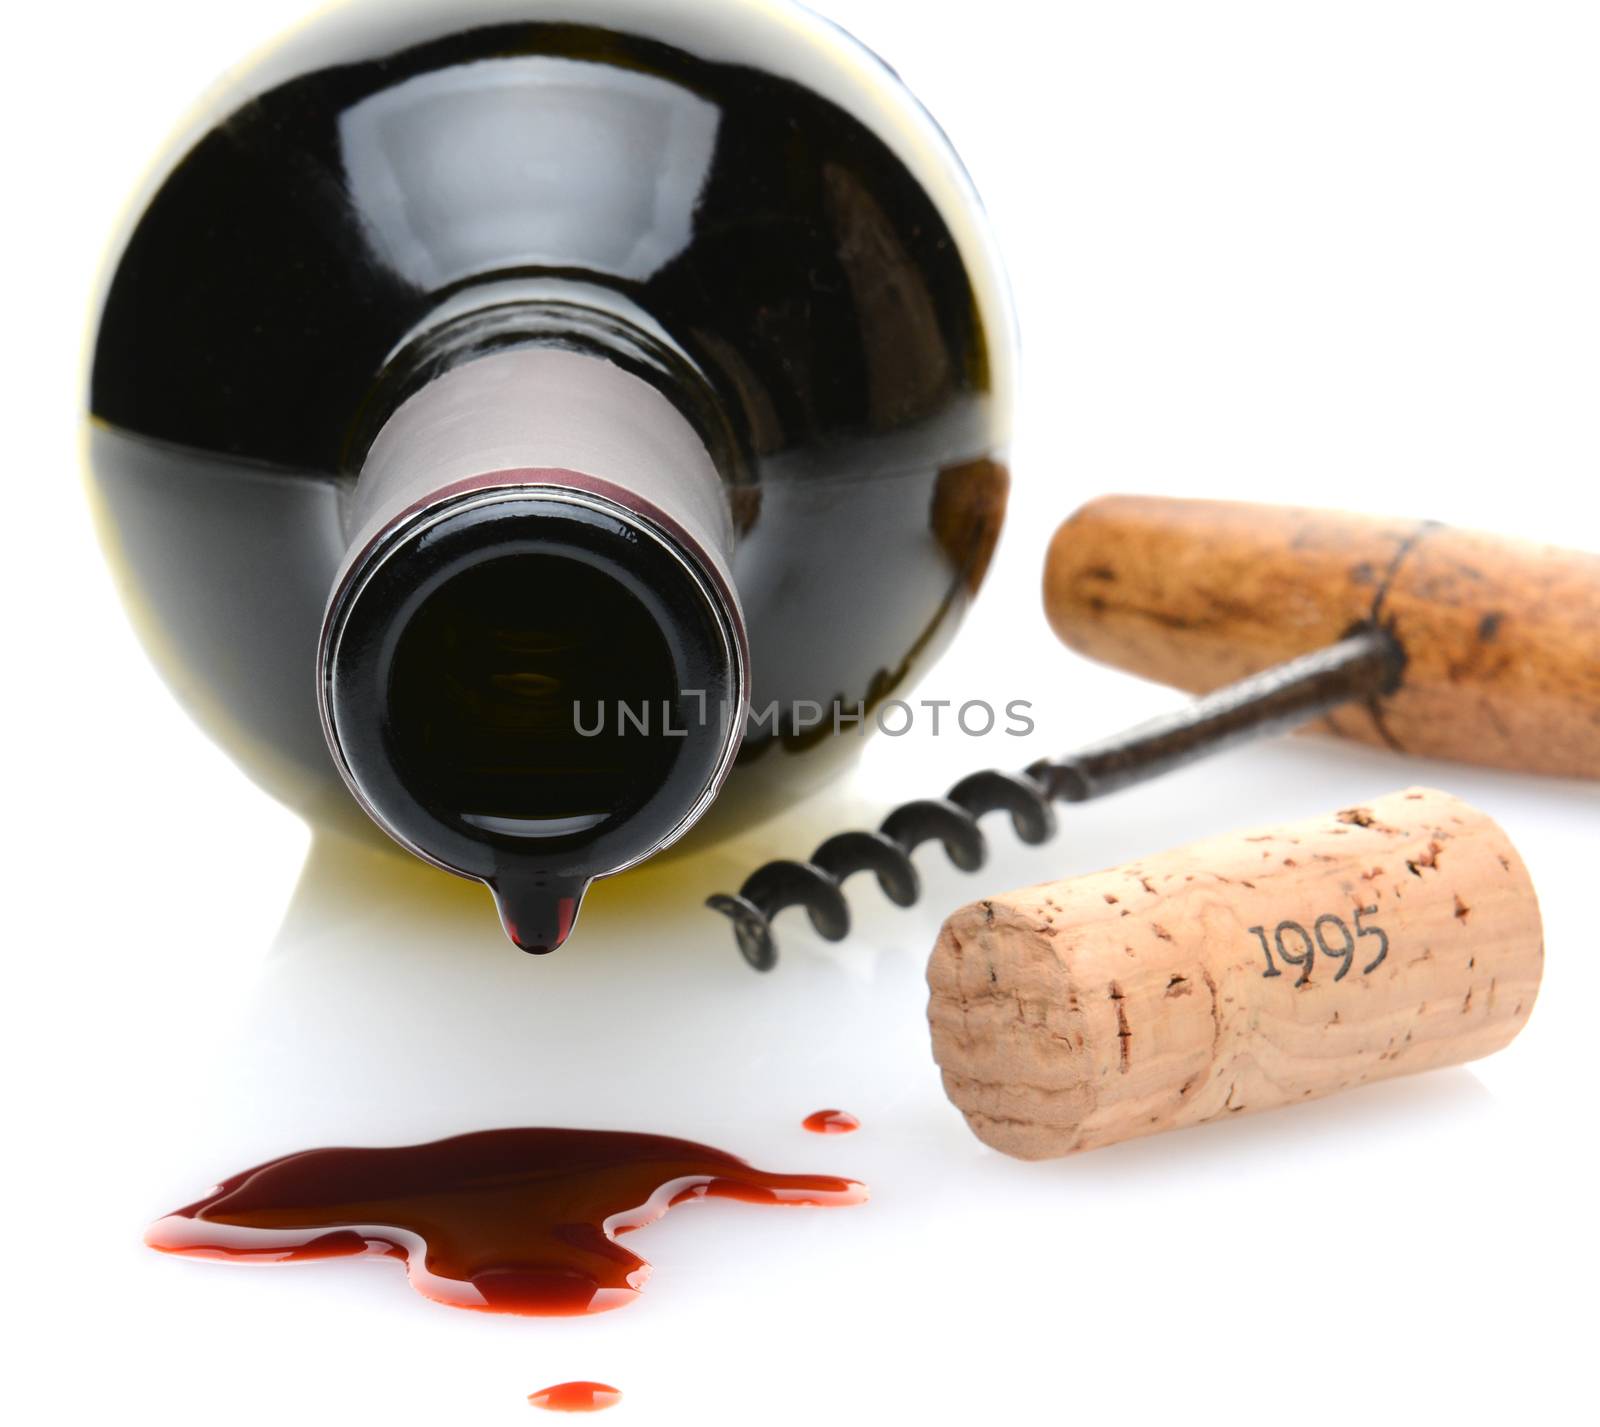 Closeup of a red wine bottle with a drip and wine spill in the foreground. A cork screw and cork to one side on a white background with slight reflection. Shallow depth of field with focus on the drip.